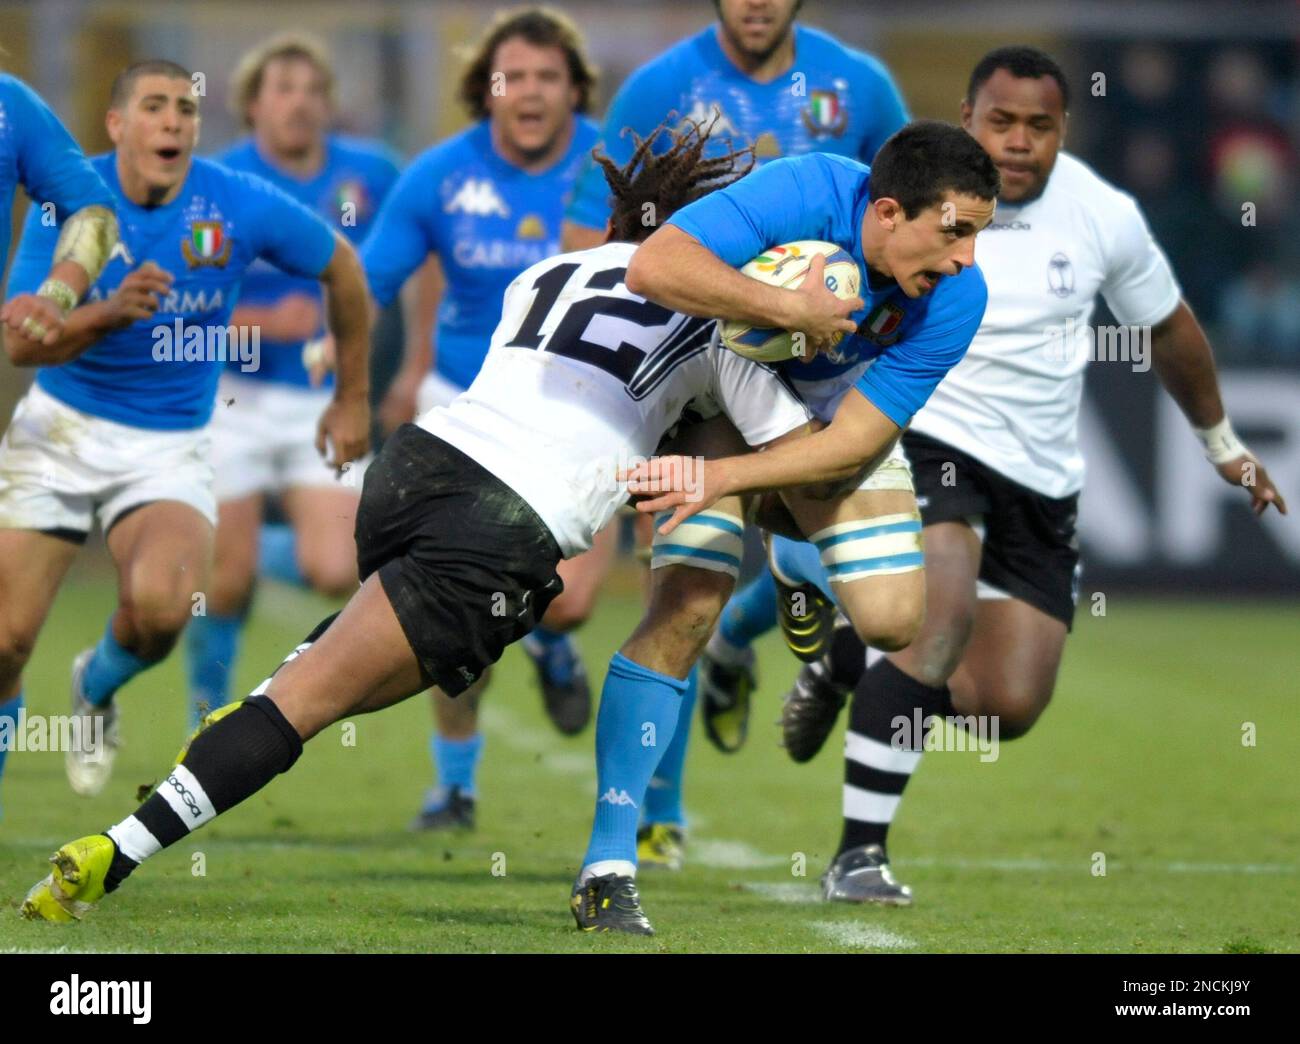 Italy's Paul Derbyshire, right, is tackled by Fiji Islands's Gabiriele  Lovobalavu during the international rugby union match between Italy and  Fiji Islands at the Alberto Braglia Stadium in Modena, Italy, Saturday, Nov.